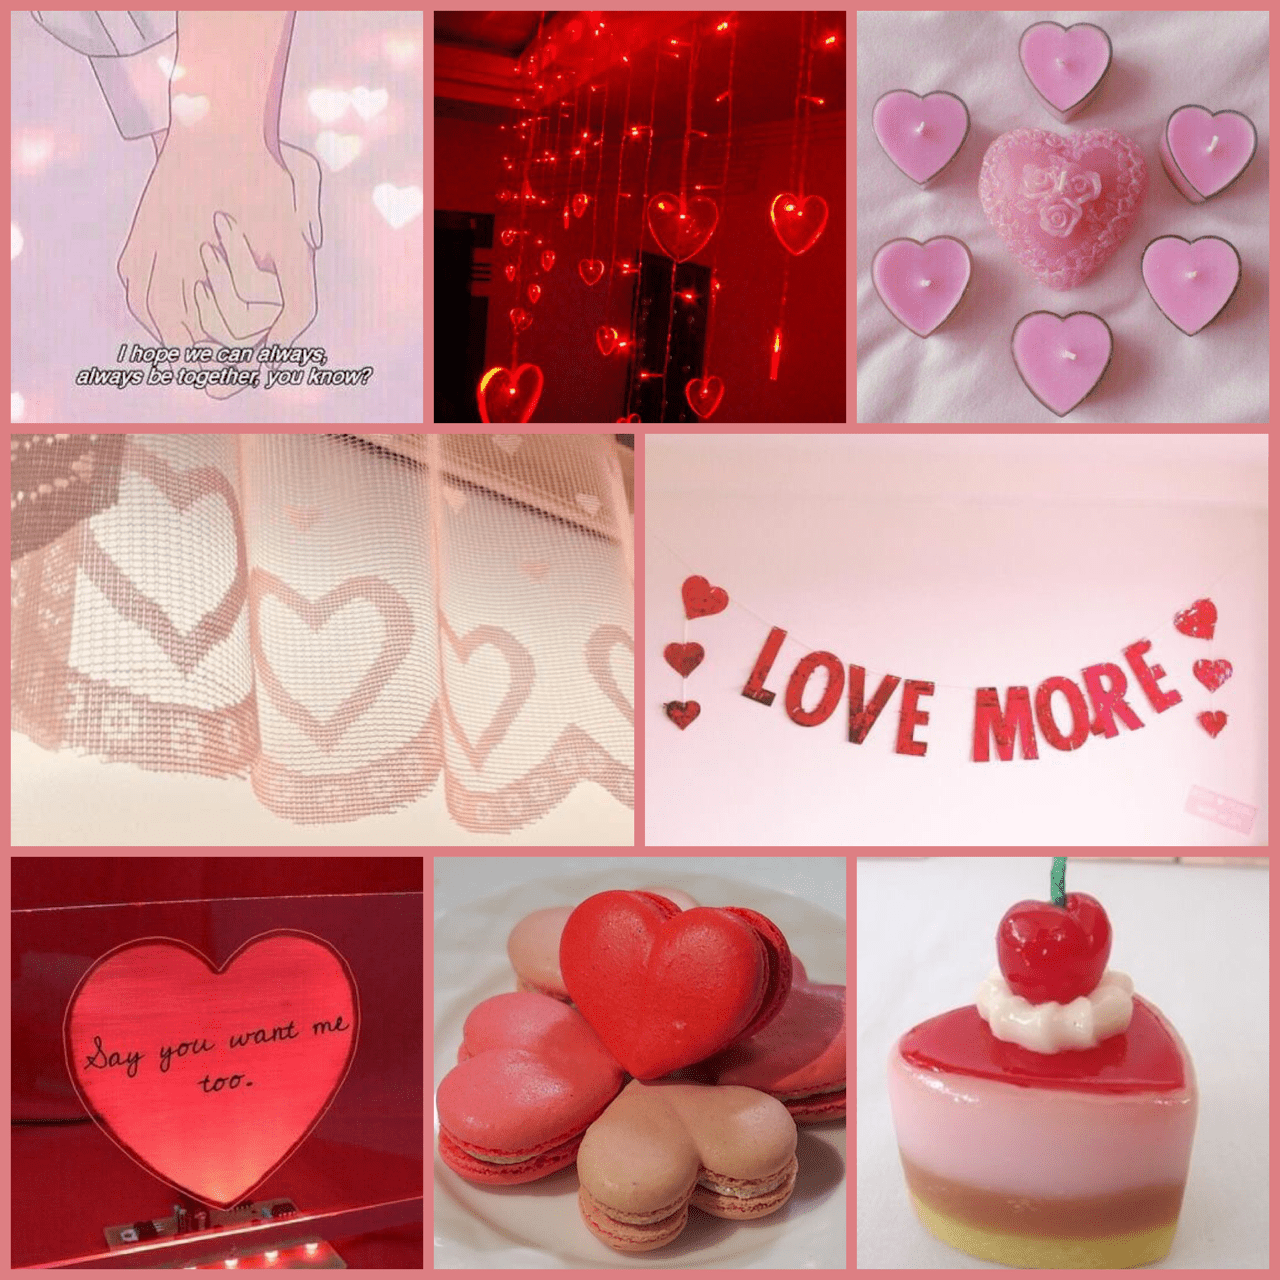 Aesthetic background for valentines day - Lovecore